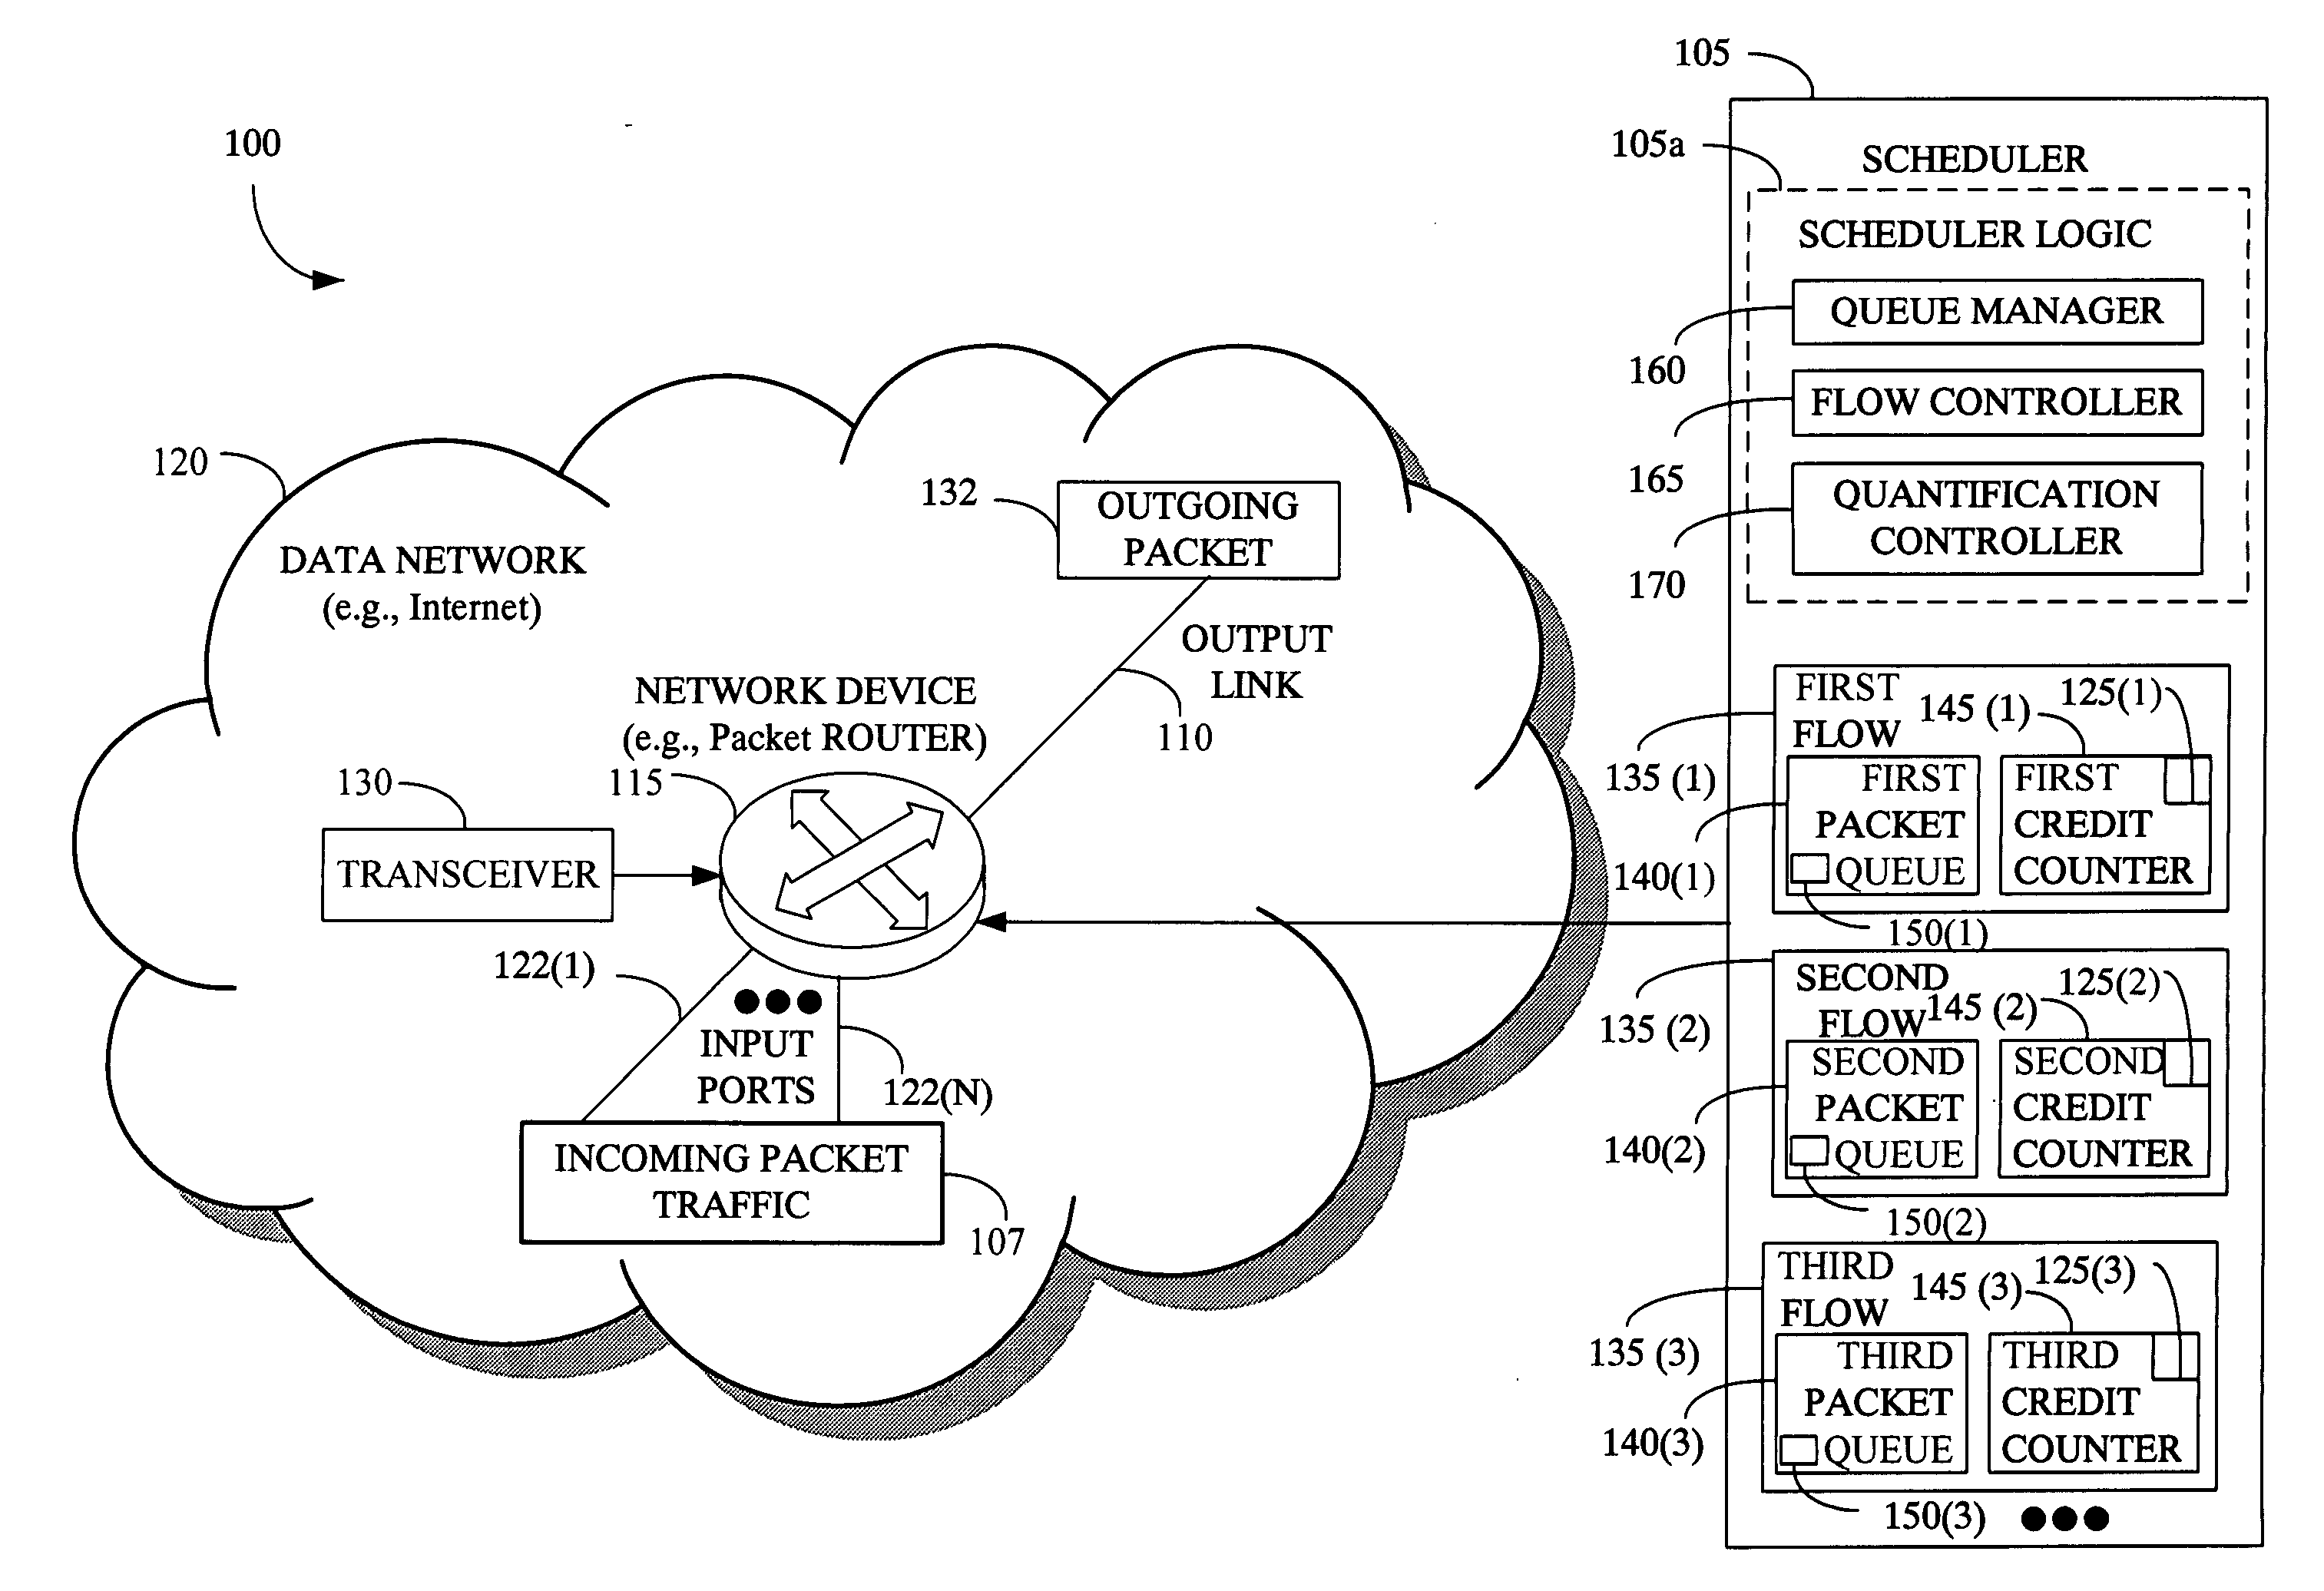 Scheduling incoming packet traffic on an output link of a network device associated with a data network